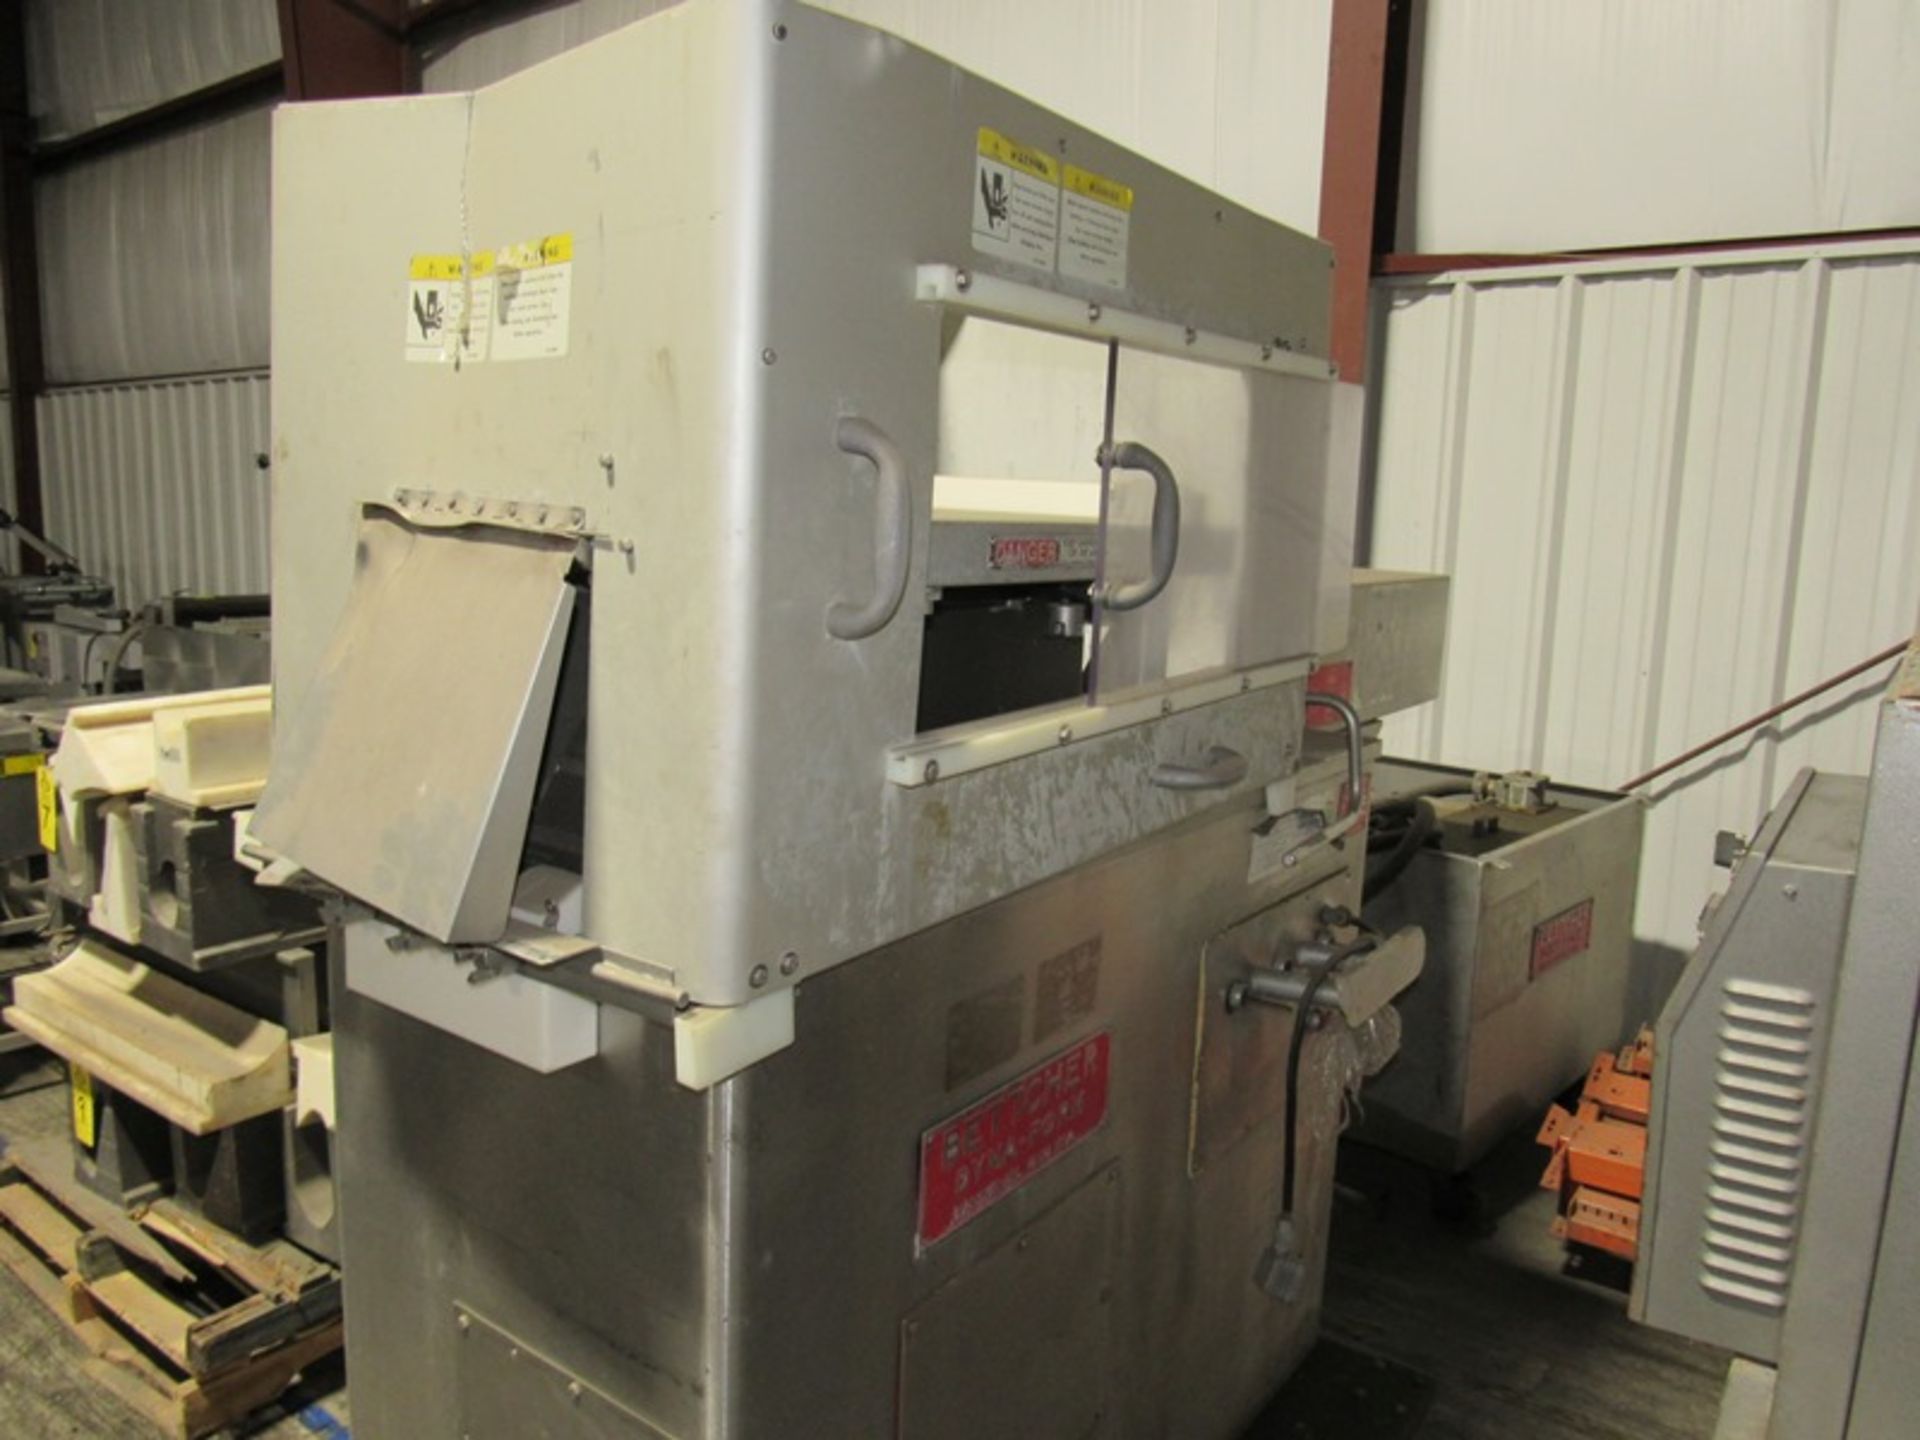 Bettcher Mdl. 75 Dyna-Form Meat Press, Ser.#758506 298, with 15 h.p. hydraulic power pack, with - Image 2 of 5